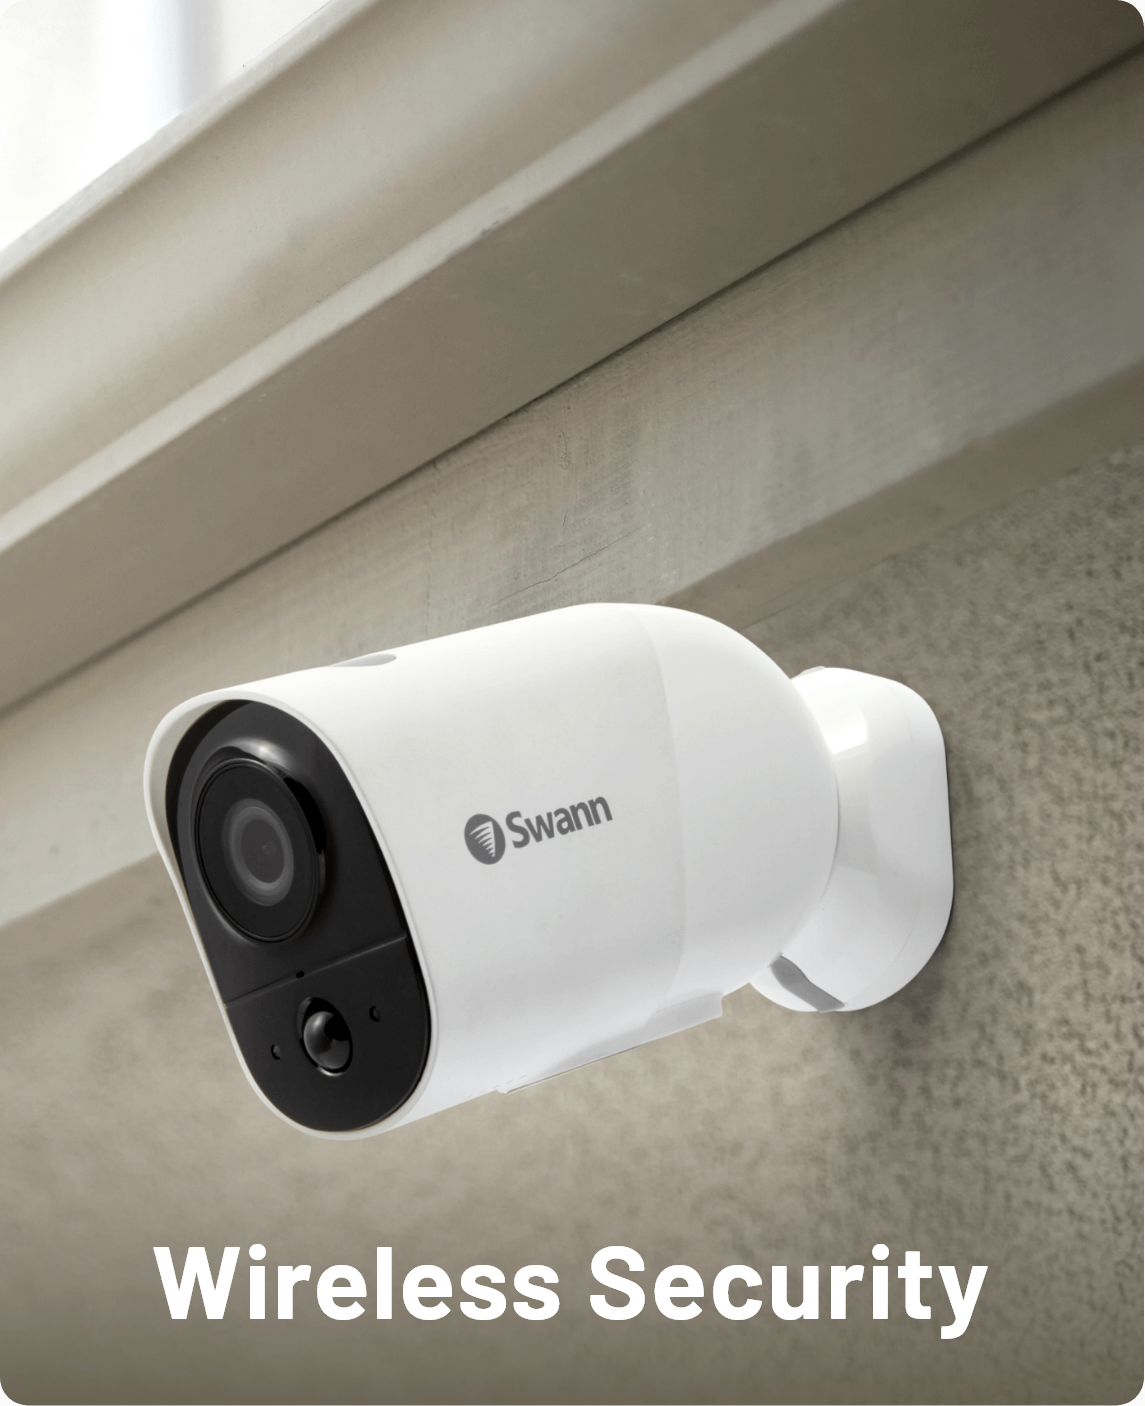 Montgomery Wat is er mis longontsteking Swann | Home Security Camera Systems